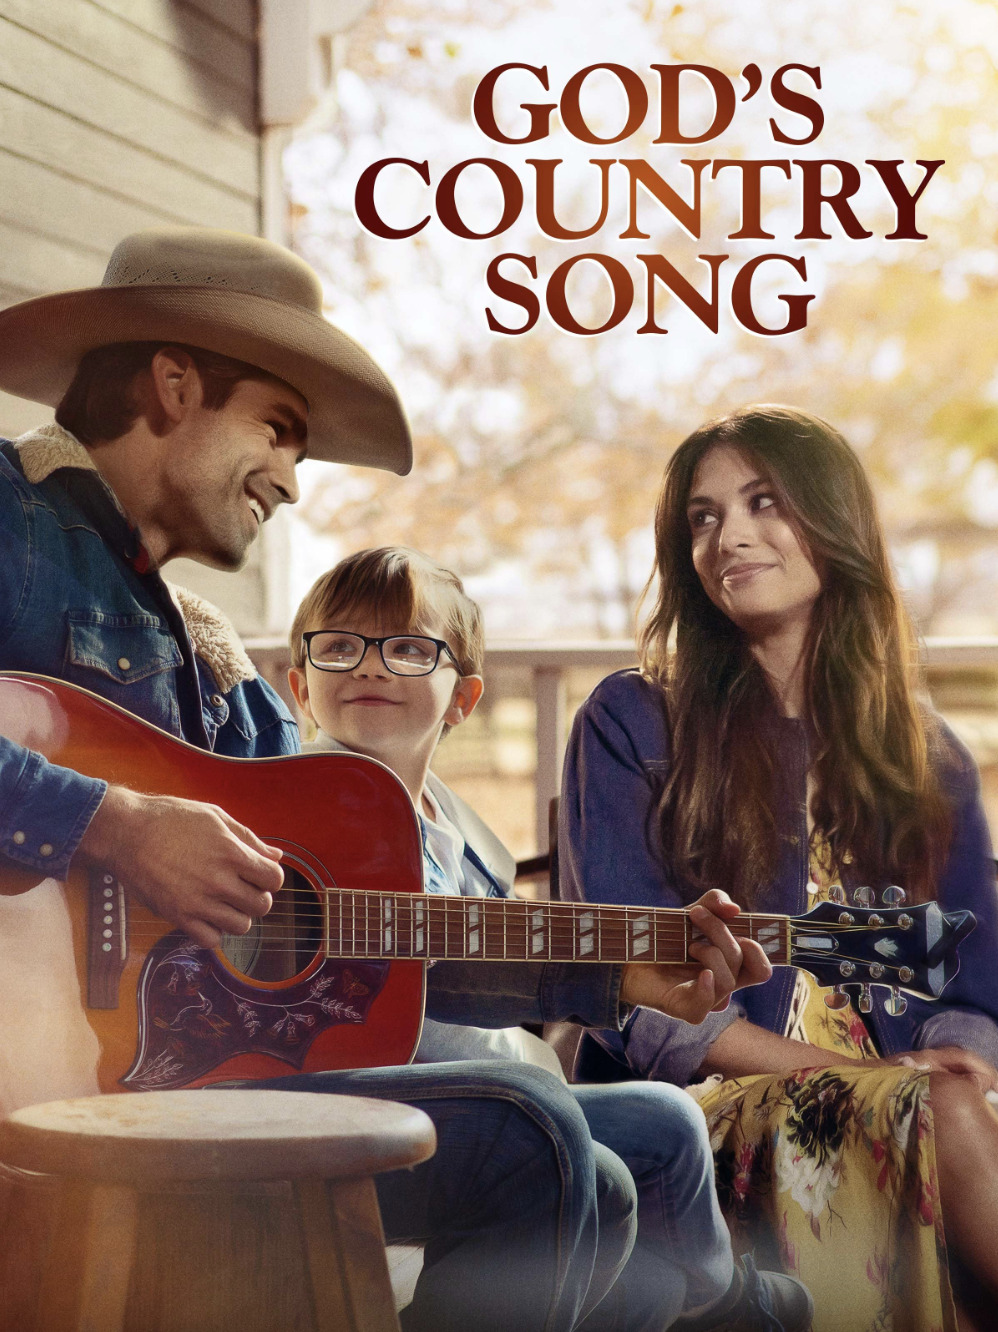 GOD’S COUNTRY SONG Movieguide Movie Reviews for Families